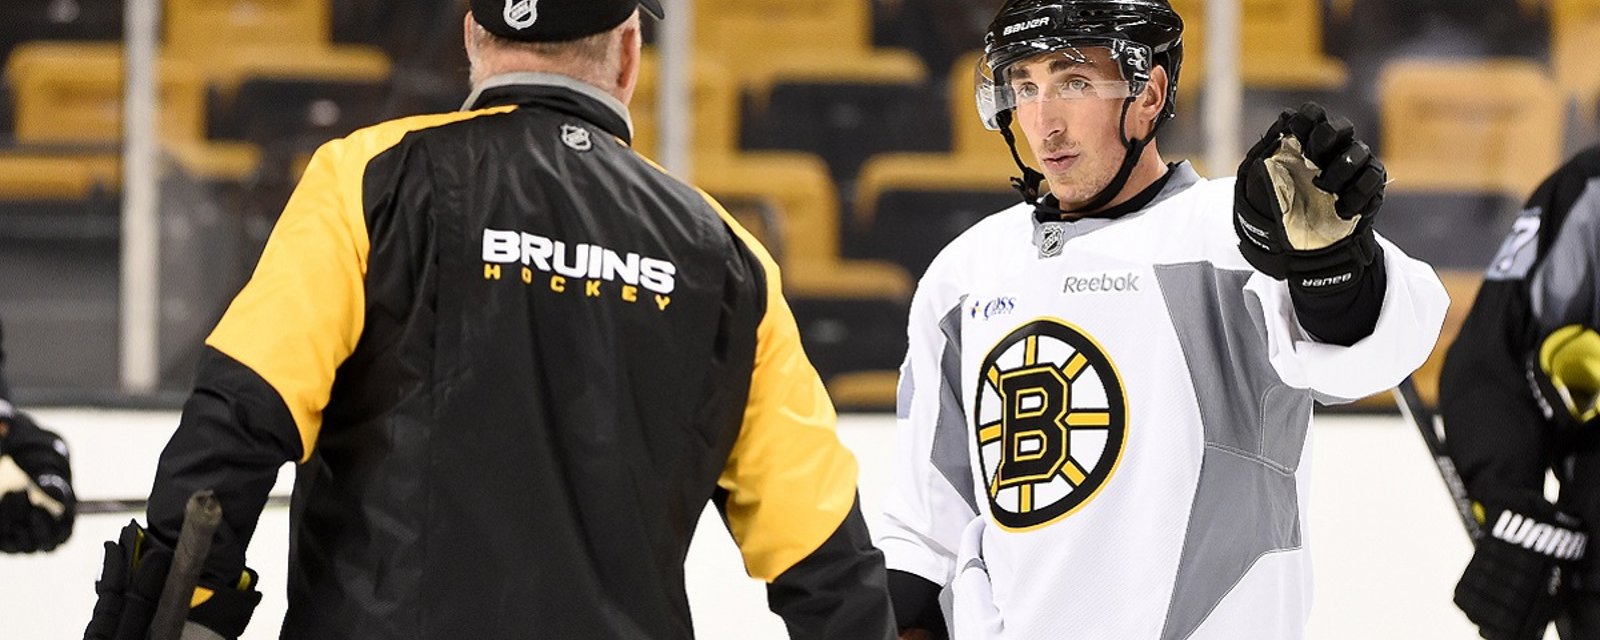 Wow! Bruins insider implies Boston's management are cowards!